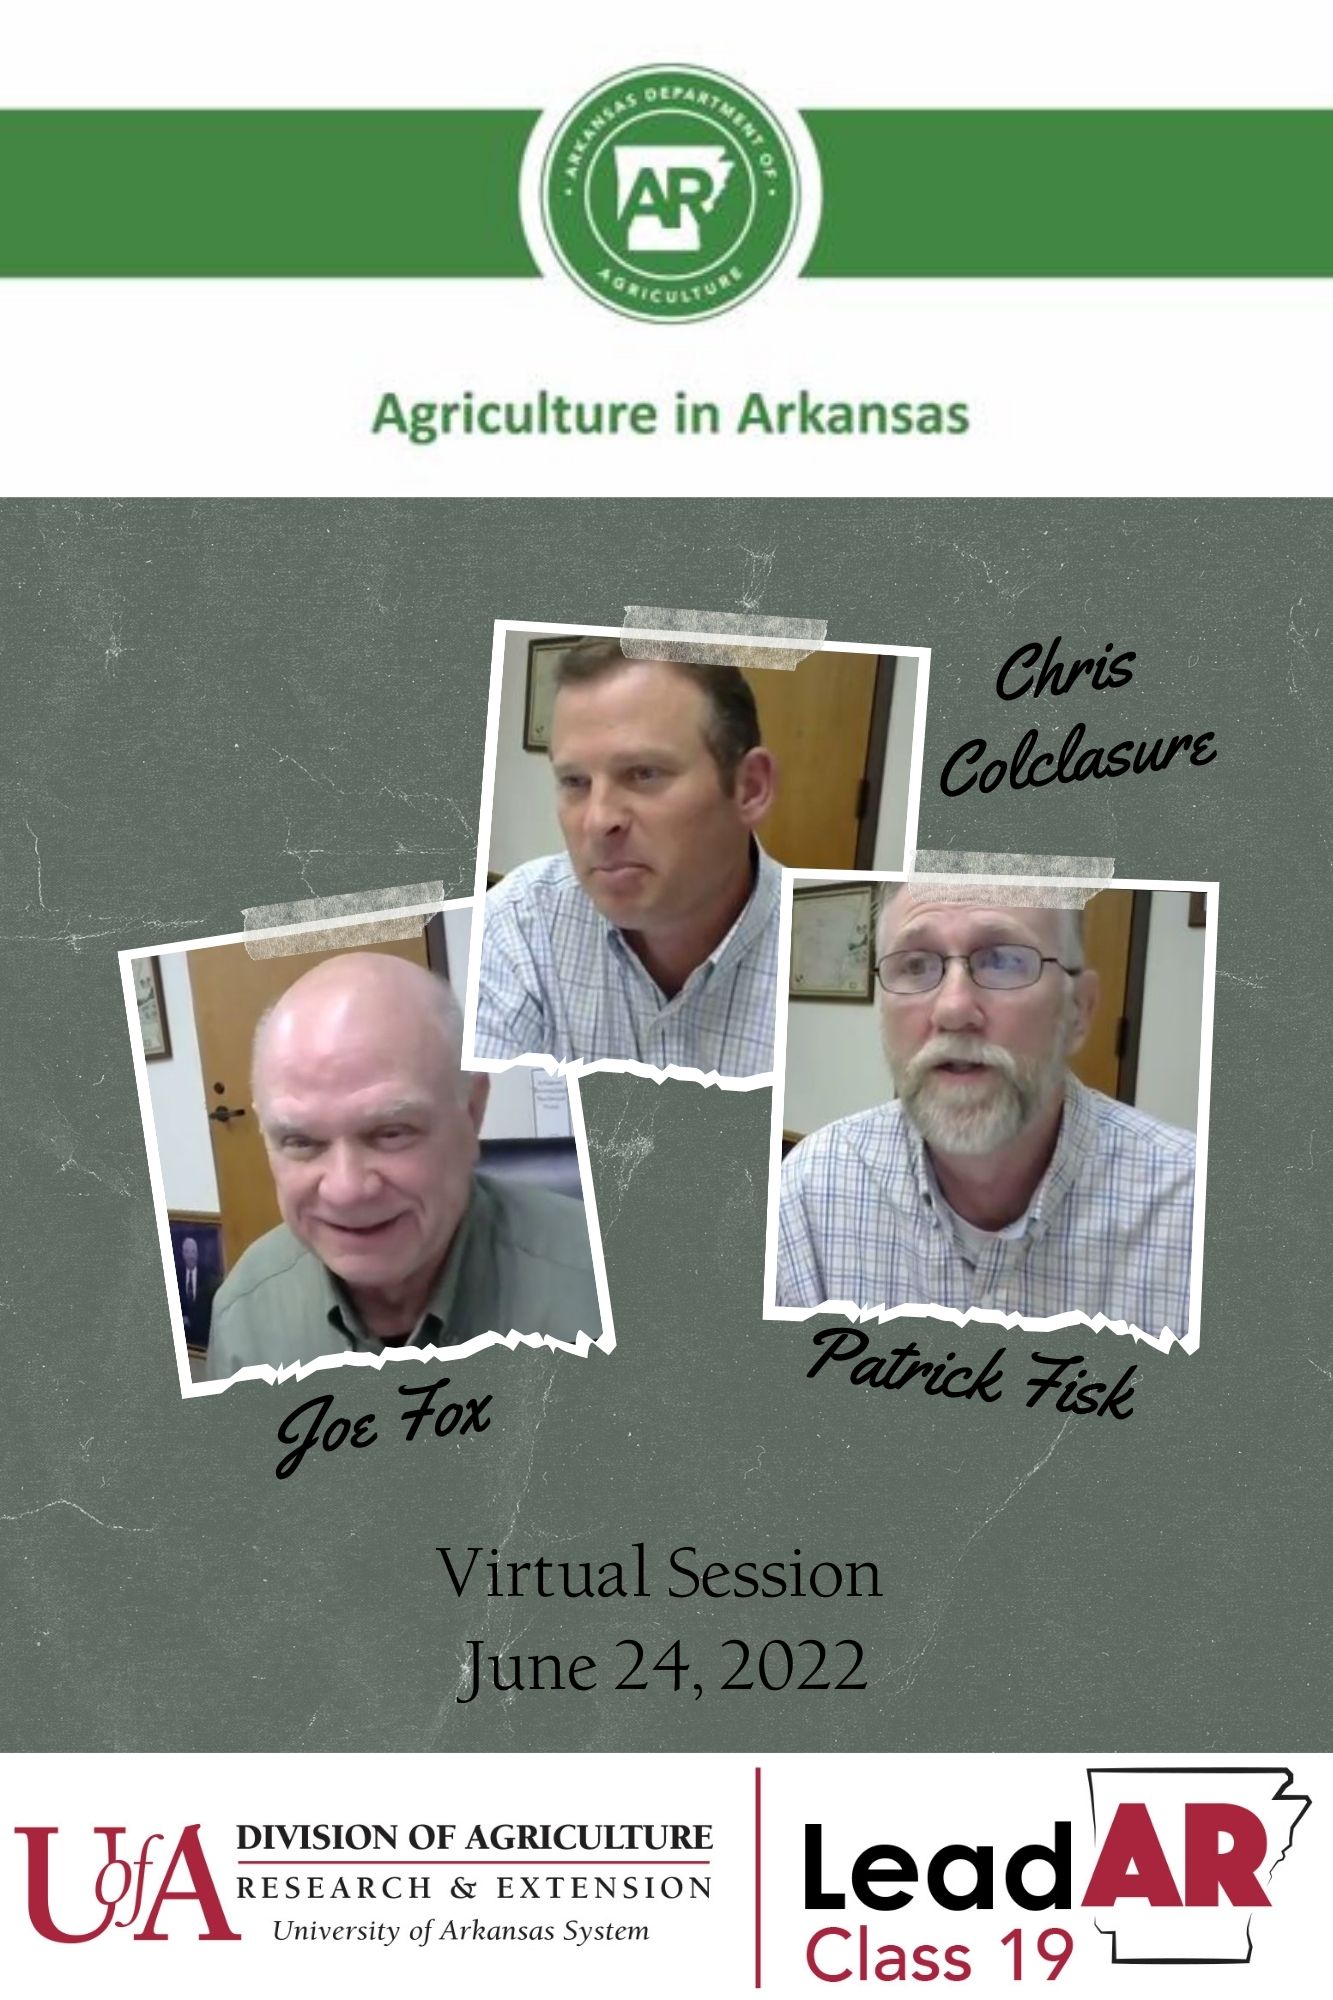 photos of Arkansas Dept of Agriculture speakers